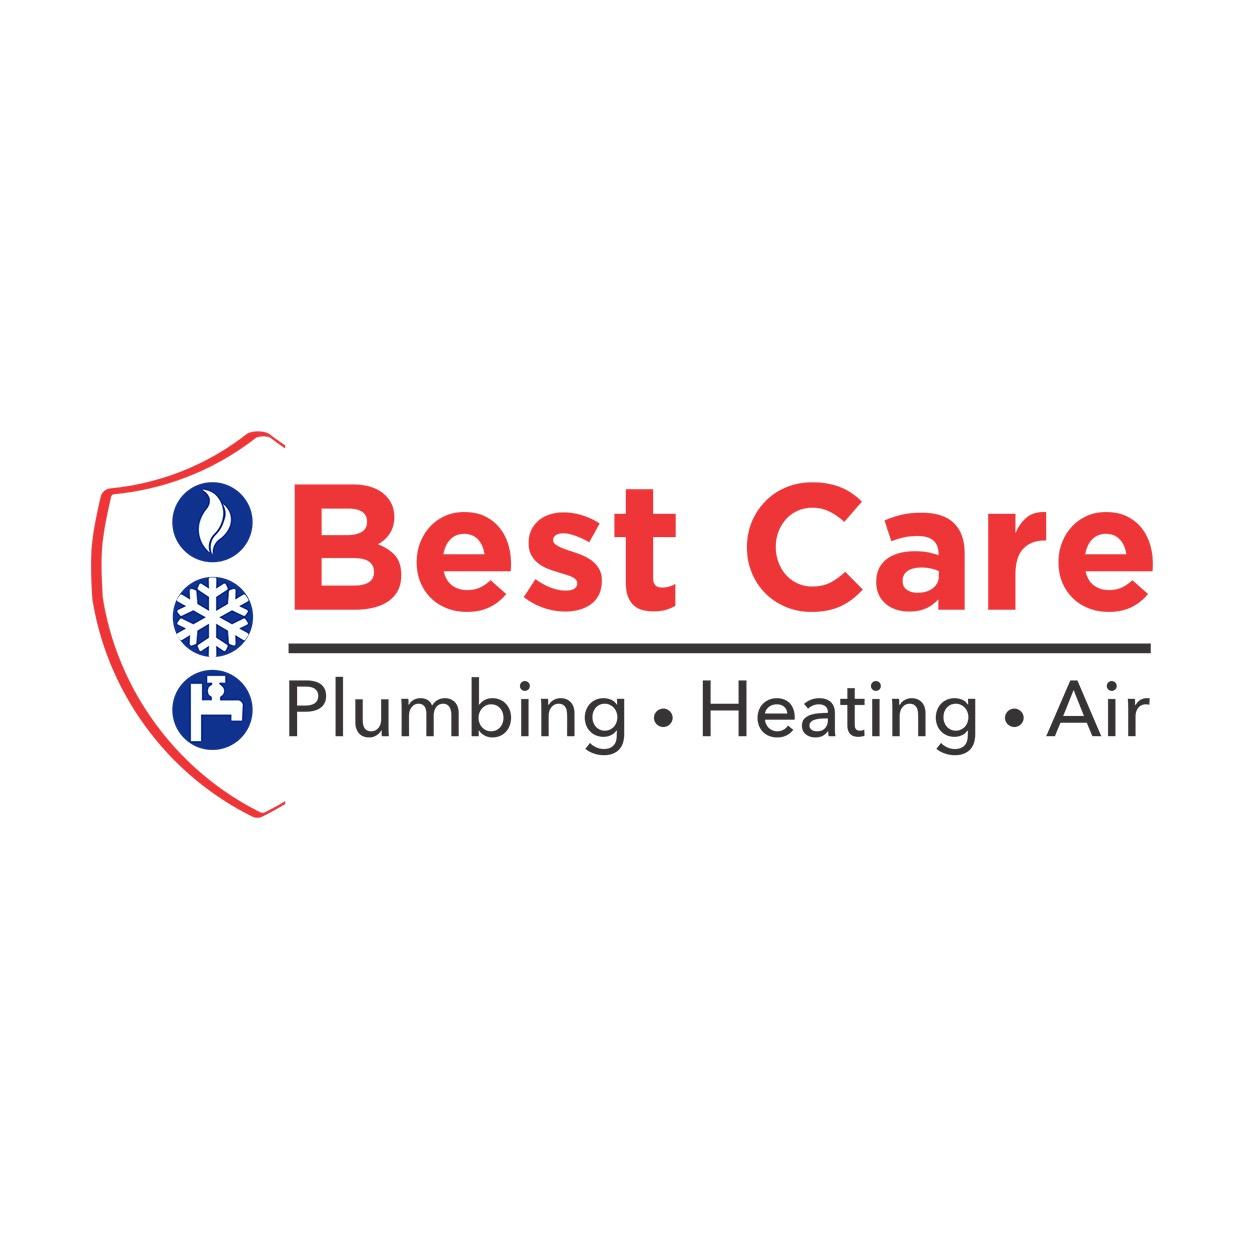 Best Care Plumbing, Heating And Air - Memphis, TN 38134 - (901)624-1401 | ShowMeLocal.com